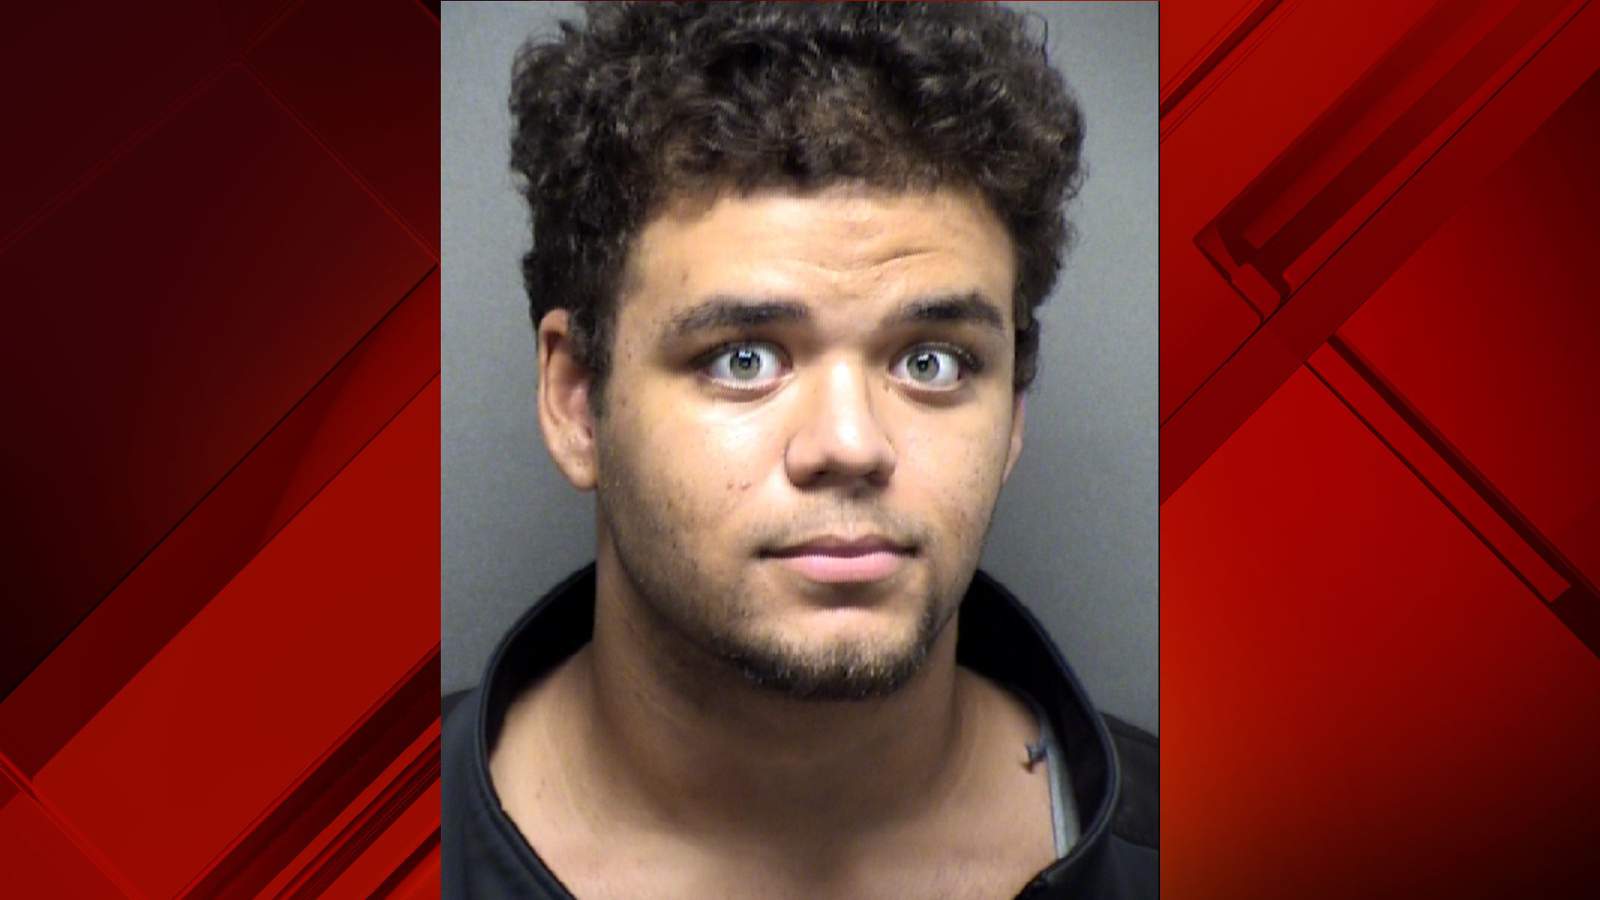 Second man charged in connection with fatal shooting of 19-year-old San Antonio woman